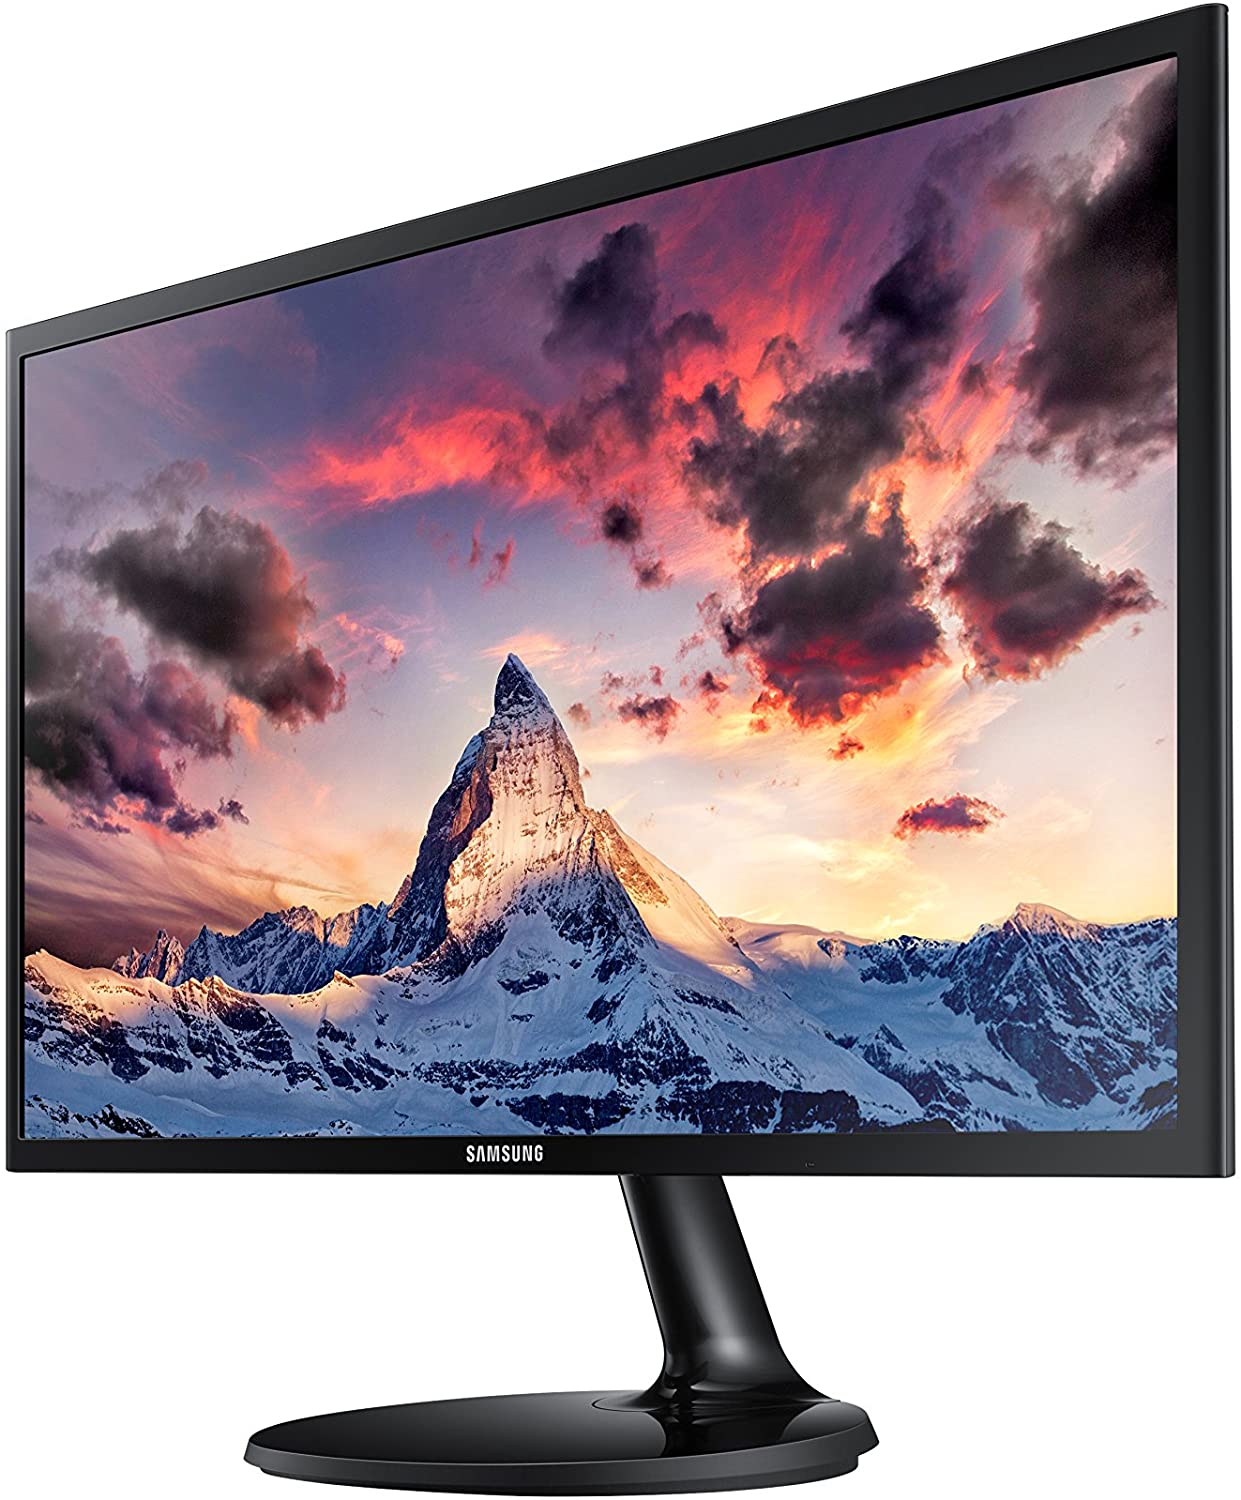 Samsung LS27F354FHNXZA-RB 27" SF354 Series LED Monitor - Certified Refurbished